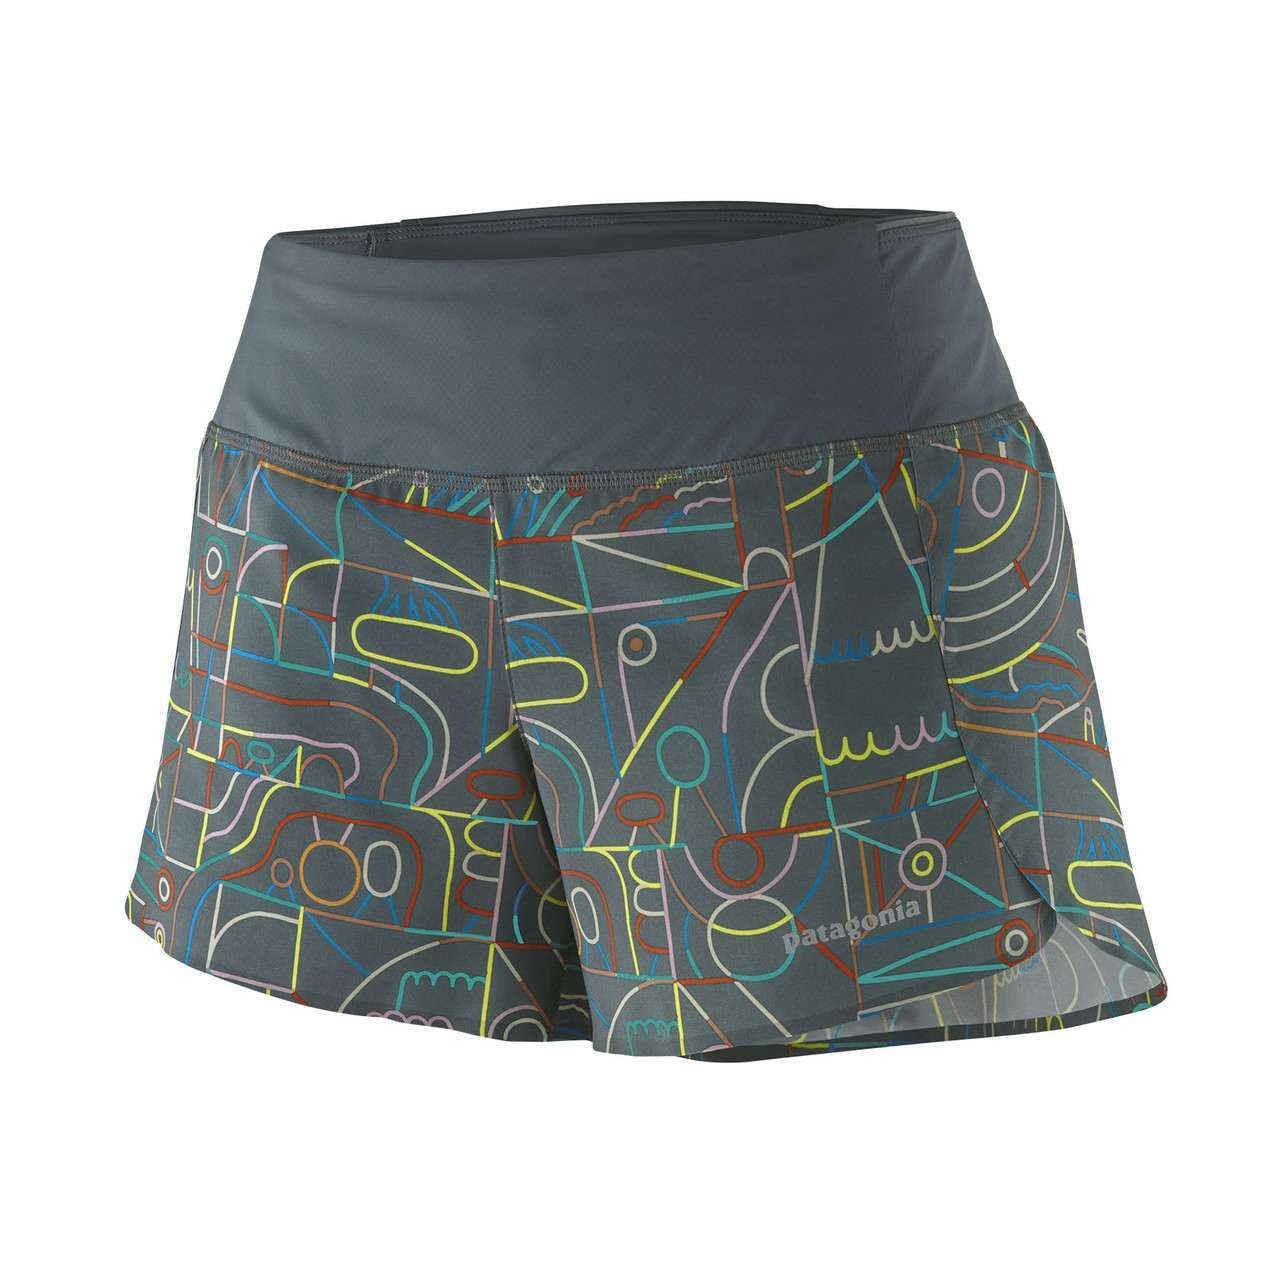 Strider Pro 3 1/2 In. Shorts Lose Yourself Outline: No